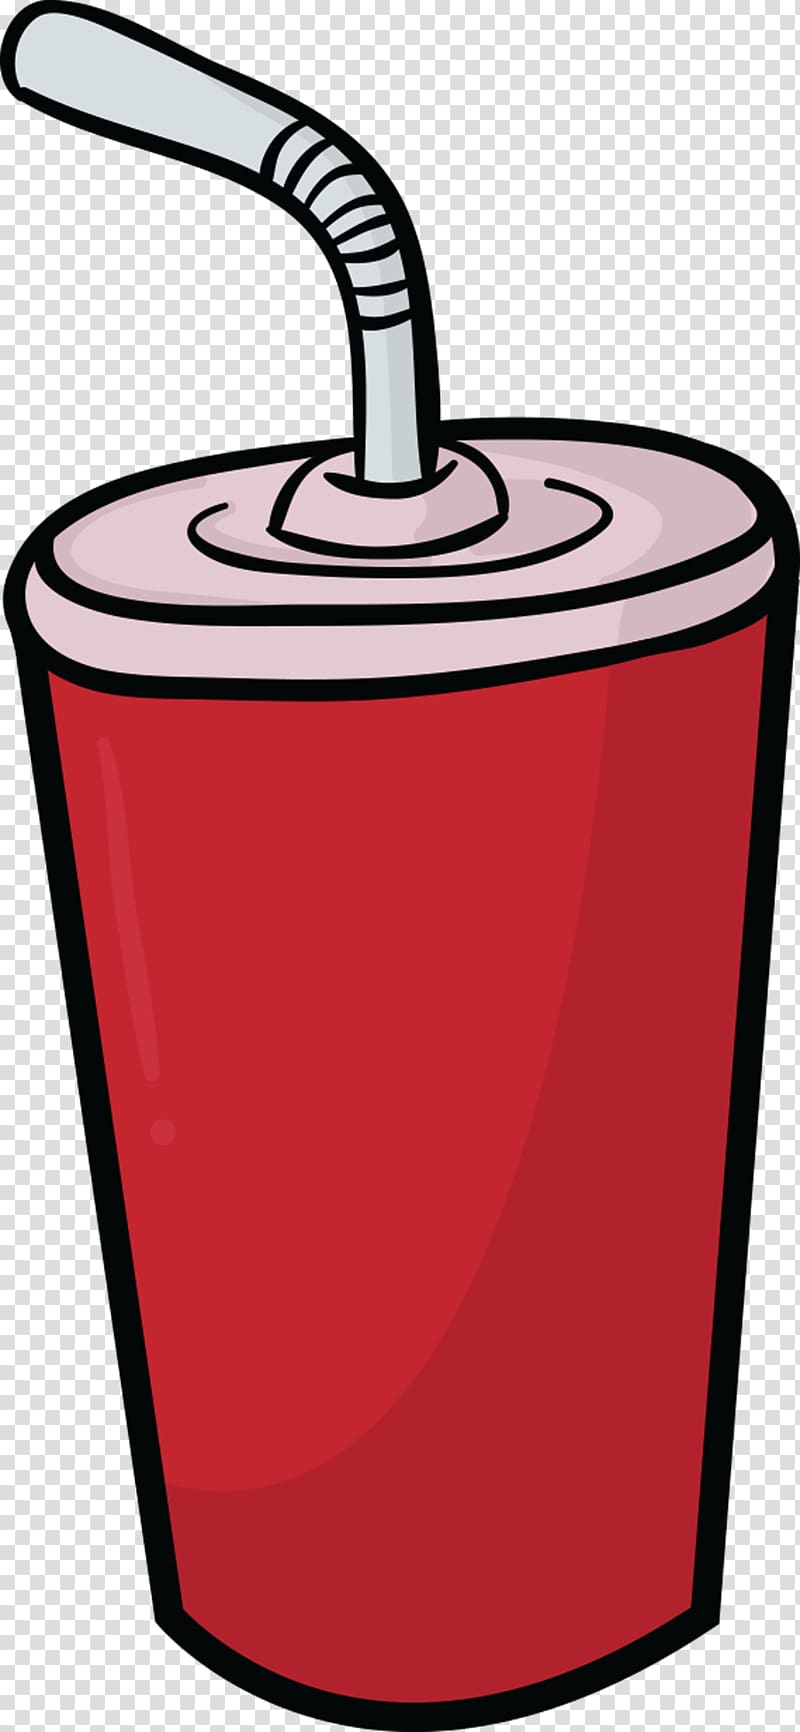 Fizzy Drinks Fast food Cola Drinking straw Beverage can, drink transparent background PNG clipart